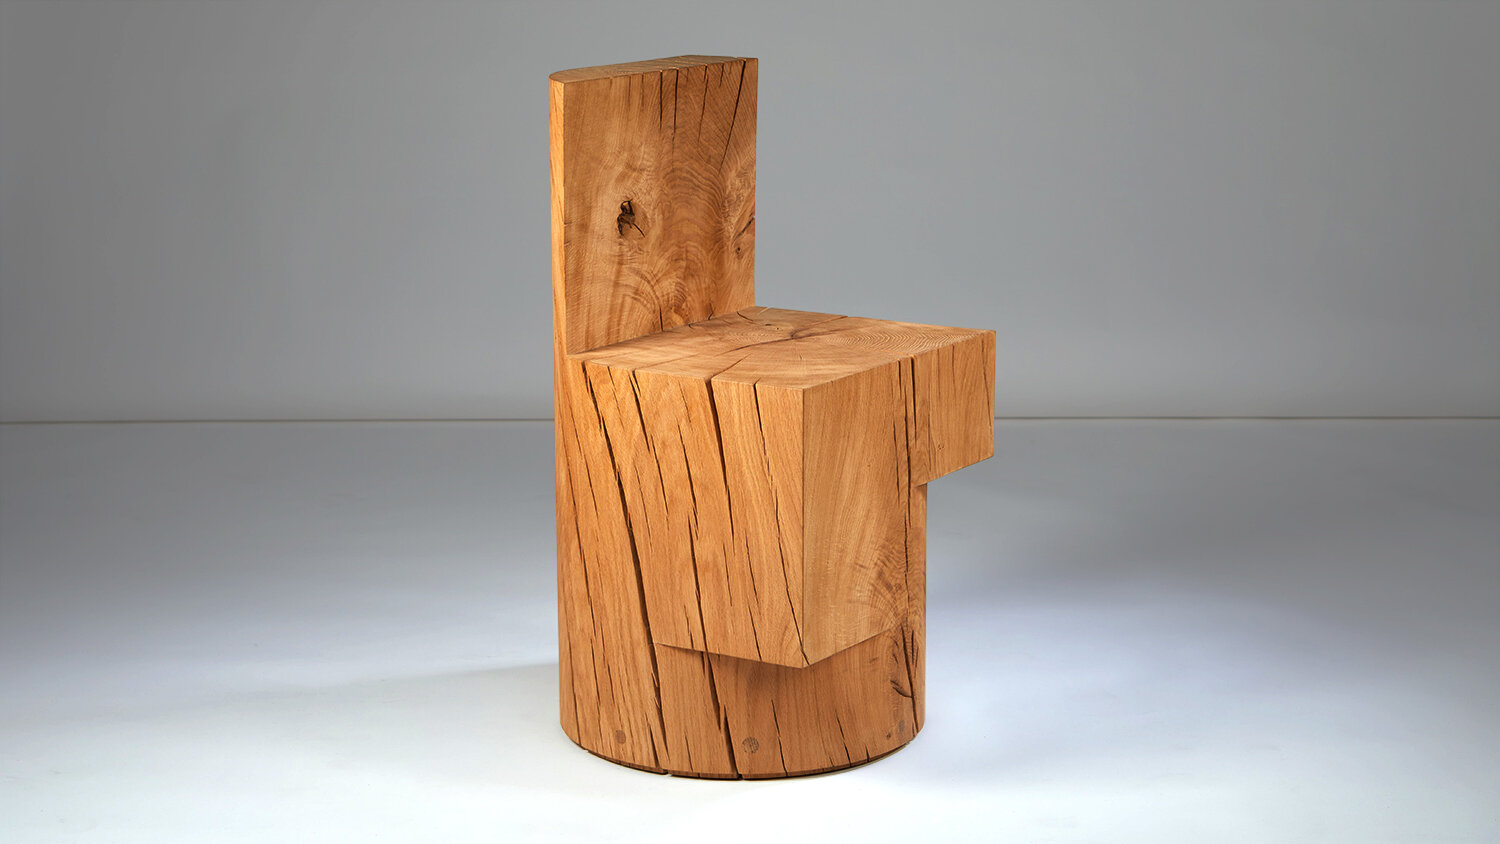 Carved geometric wooden chair 2.jpg